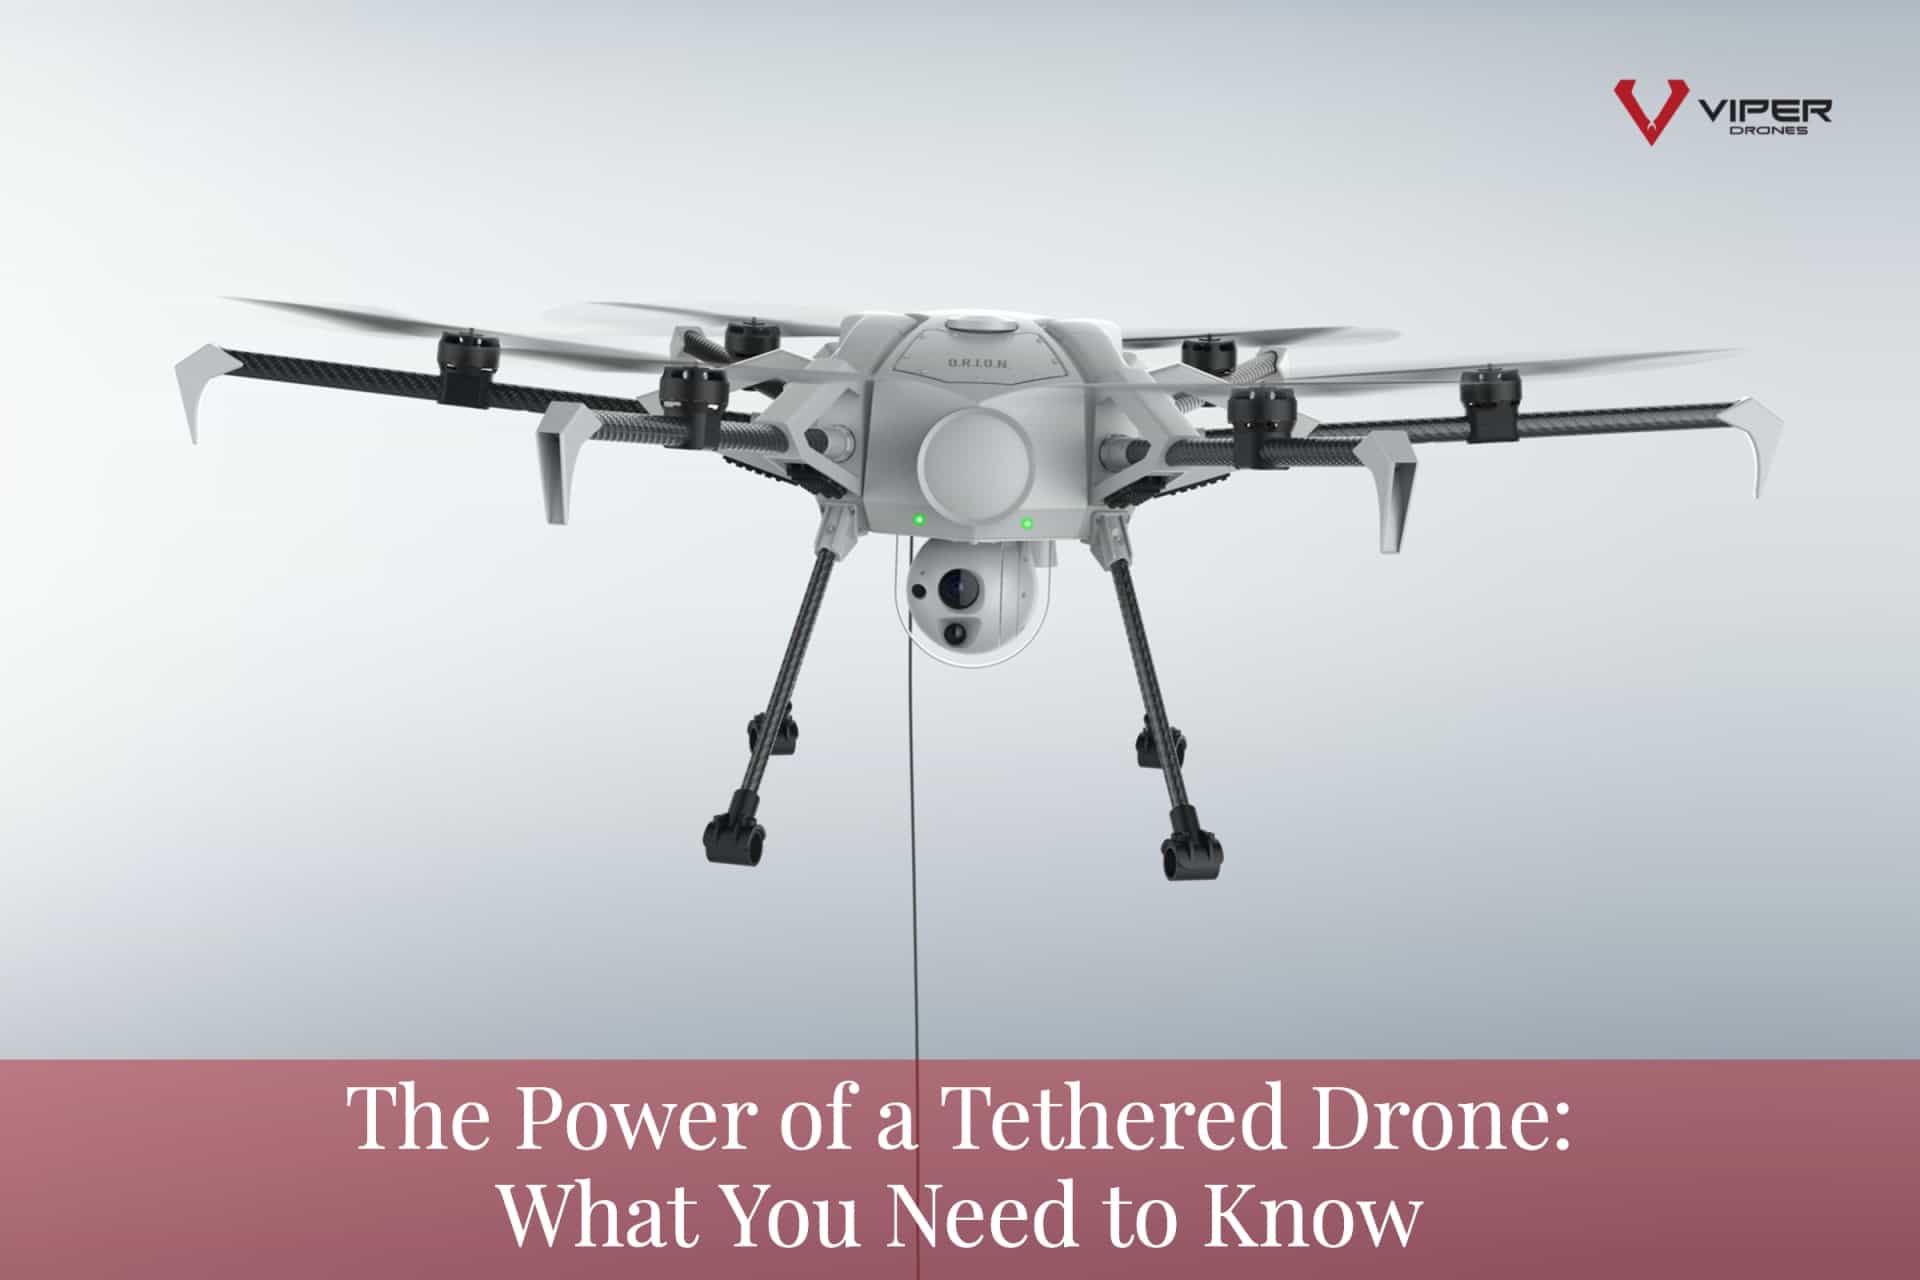 The Power of a tethered drone: What you need to know